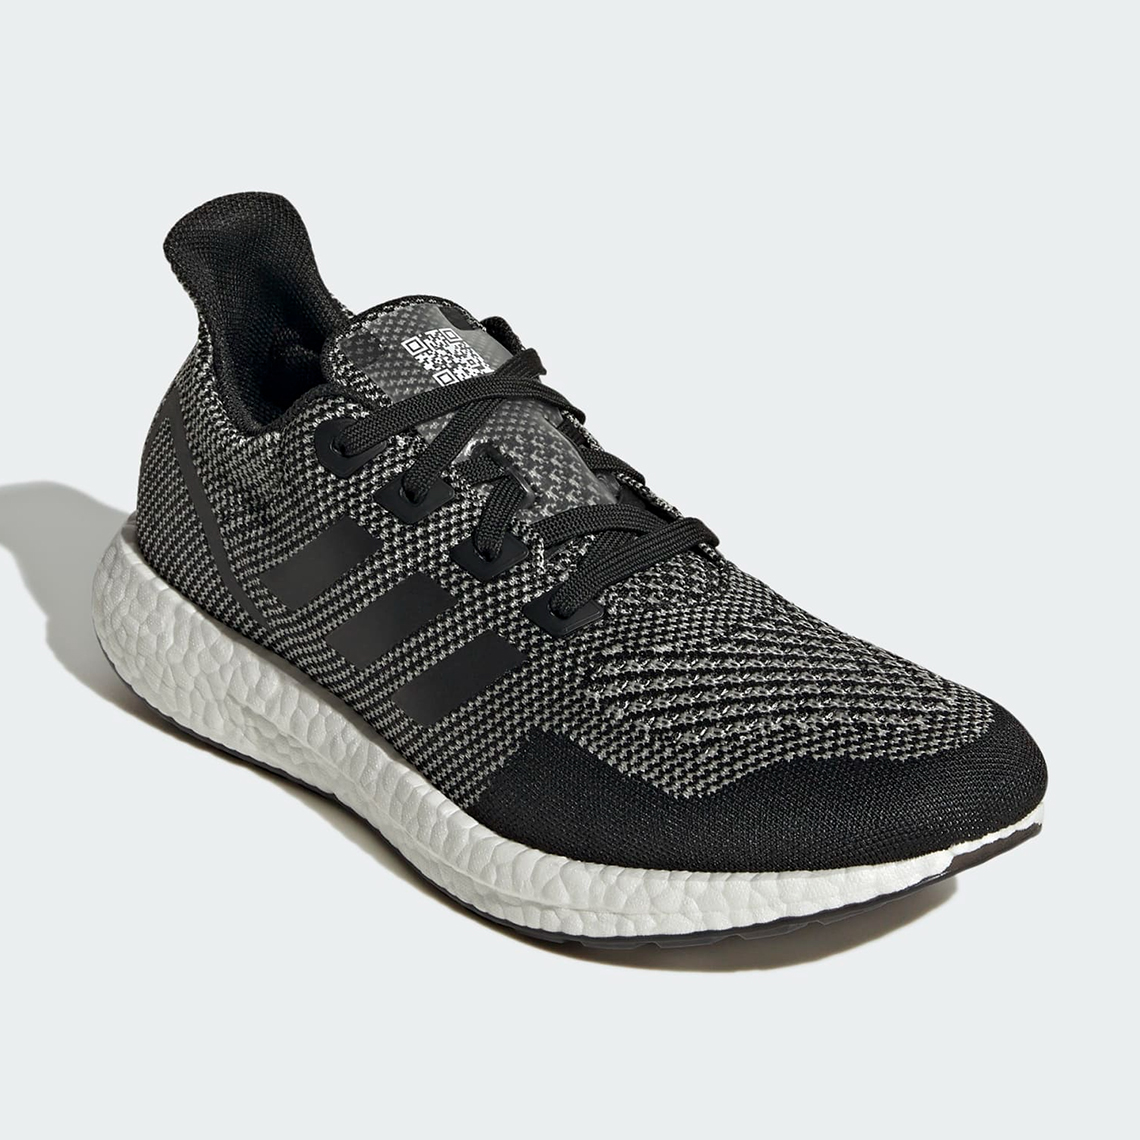 adidas ultraboost made to be remade core black cloud white GX8322 8